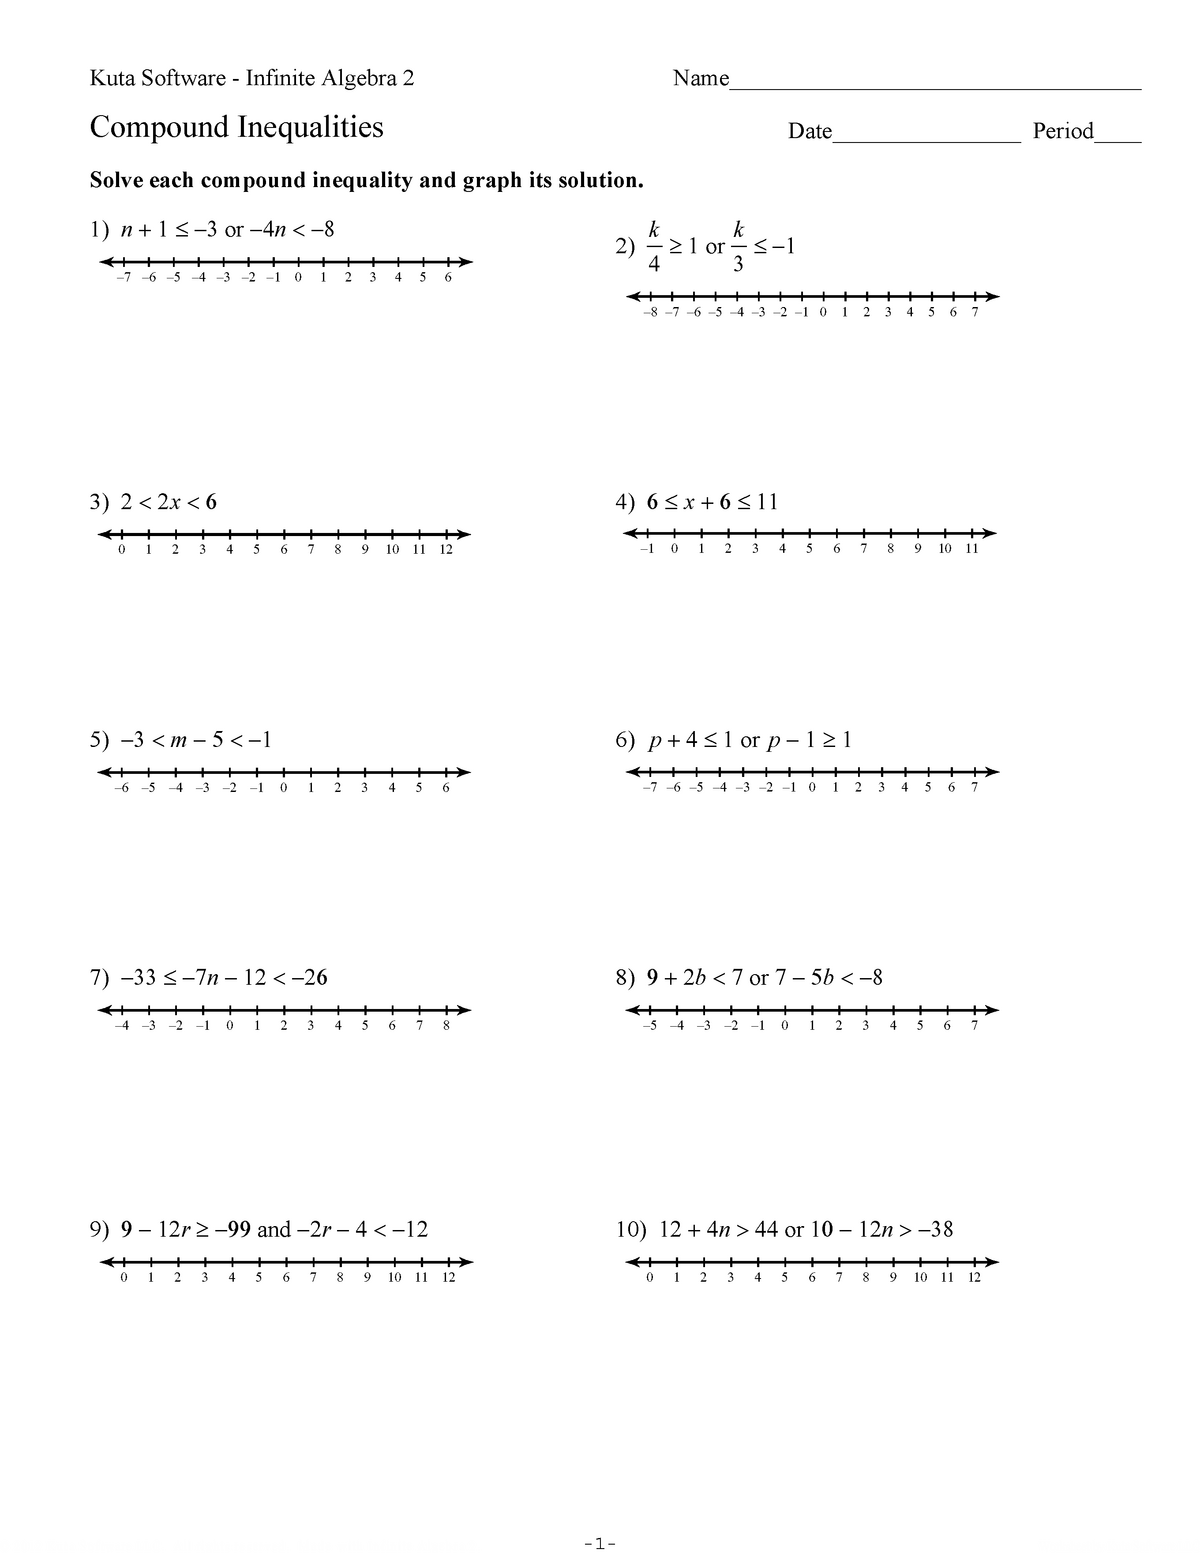 Compound Inequalities Lecture Notes 21211211 - ©z k 21211 b 21211 w 211 j 21211 D SK With Algebra 1 Inequalities Worksheet